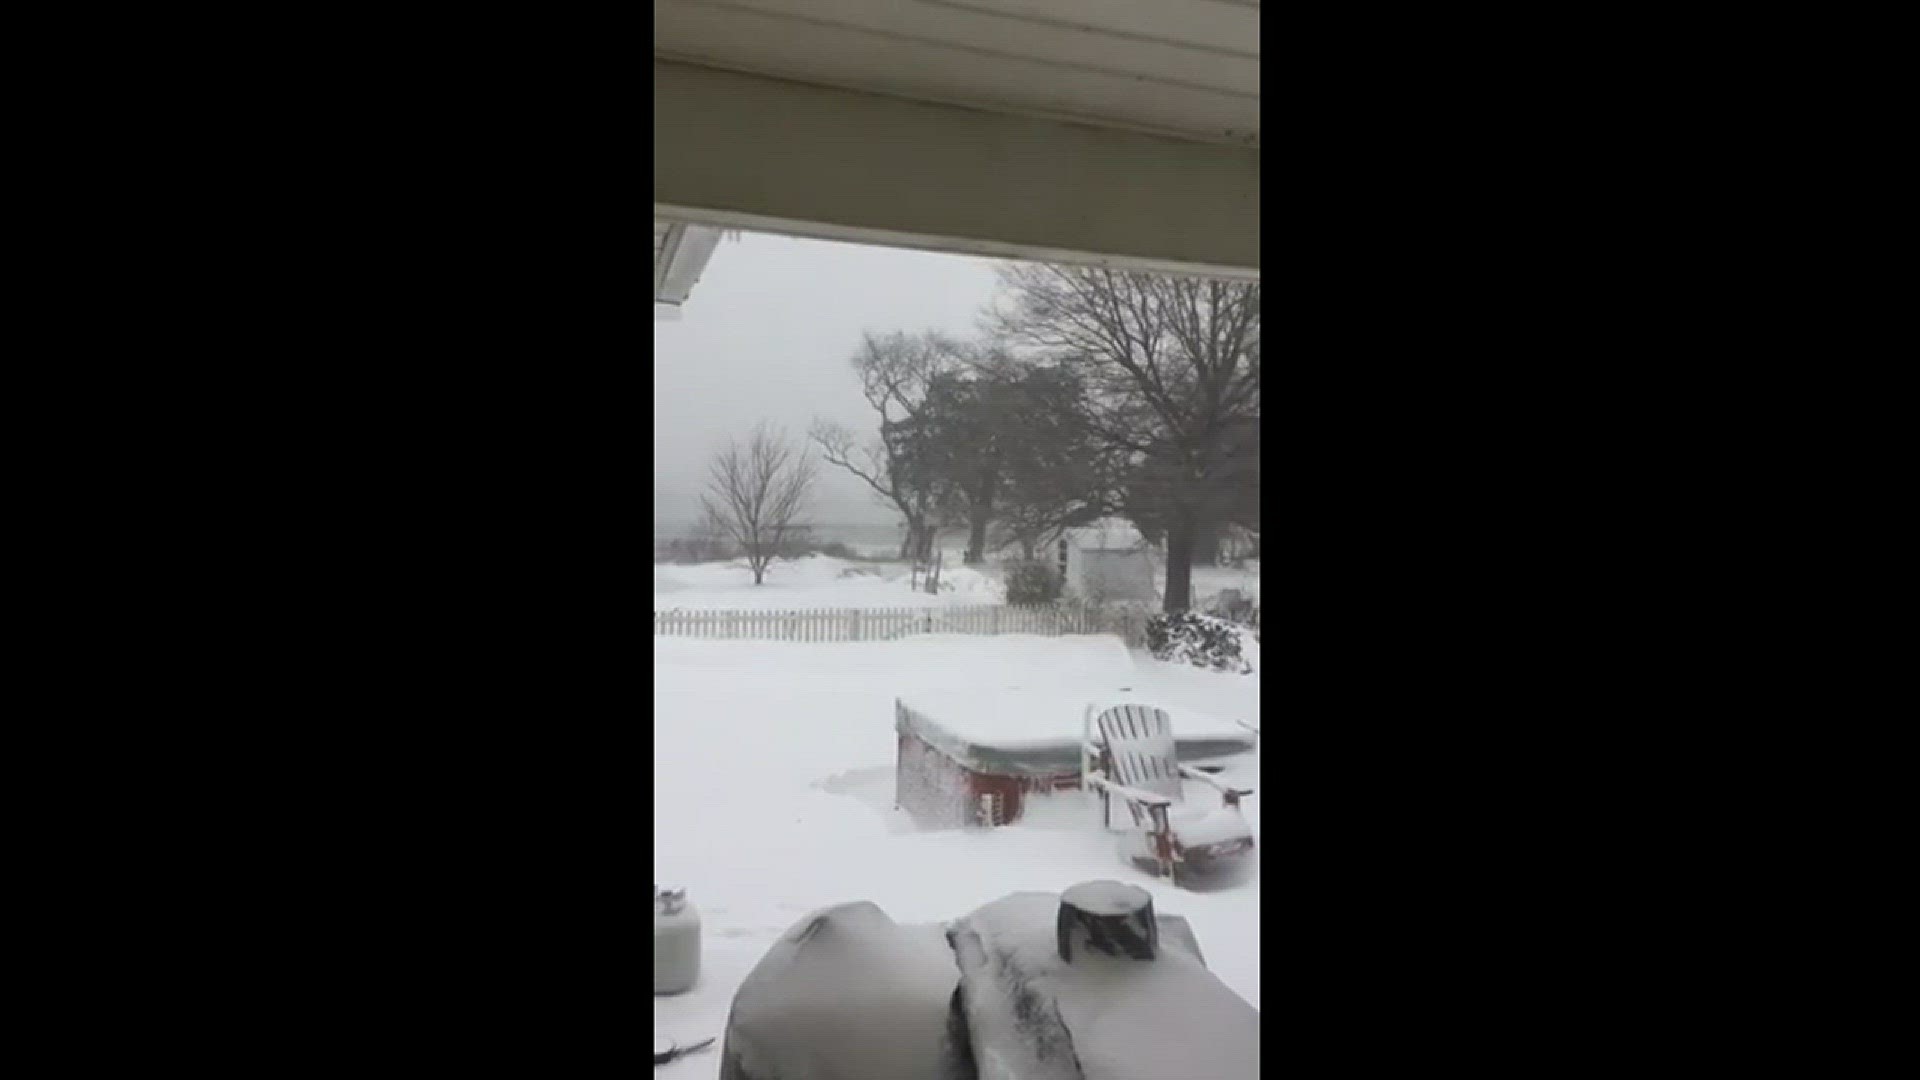 Video of our backyard on Plantation Creek at Custis Tomb, south of Cape Charles. Extreme winds and 8-to-10 inch drifts. Video courtesy Bill Poocher